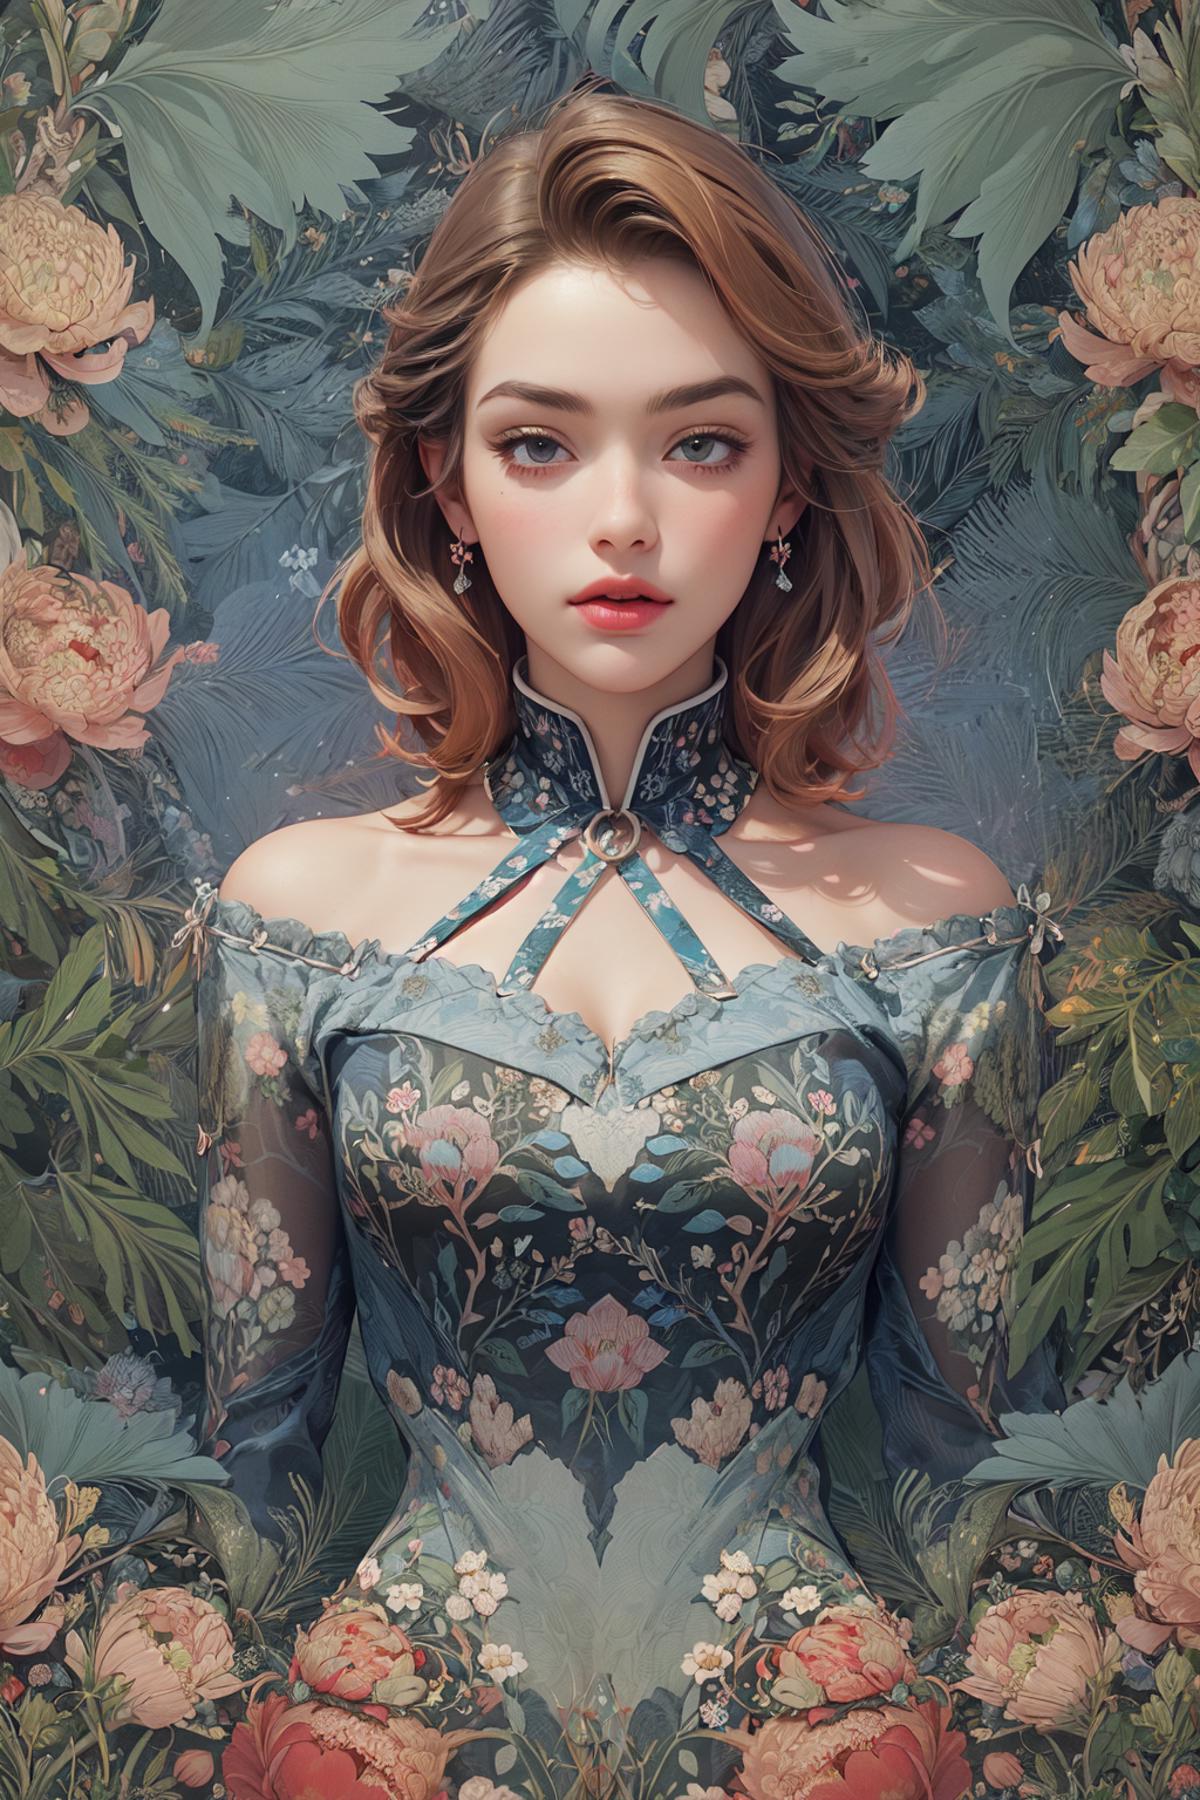 A digital painting of a woman wearing a blue dress with flowers on it.